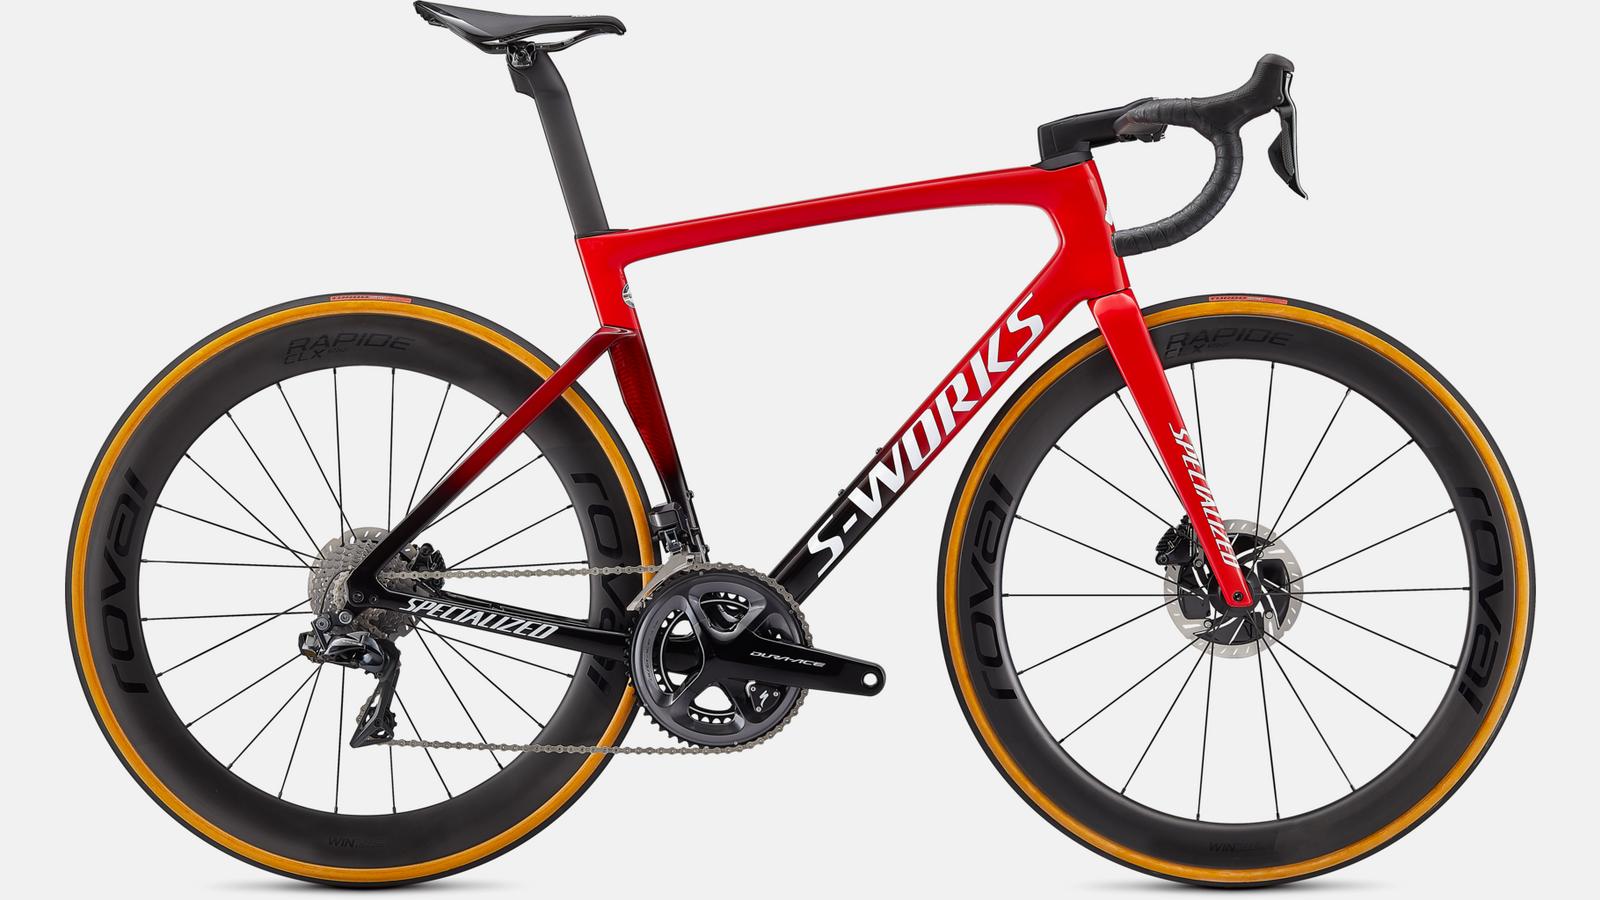 Paint for 2021 Specialized S-Works Tarmac SL7 - Gloss Dura Ace Di2 - Gloss Flo Red